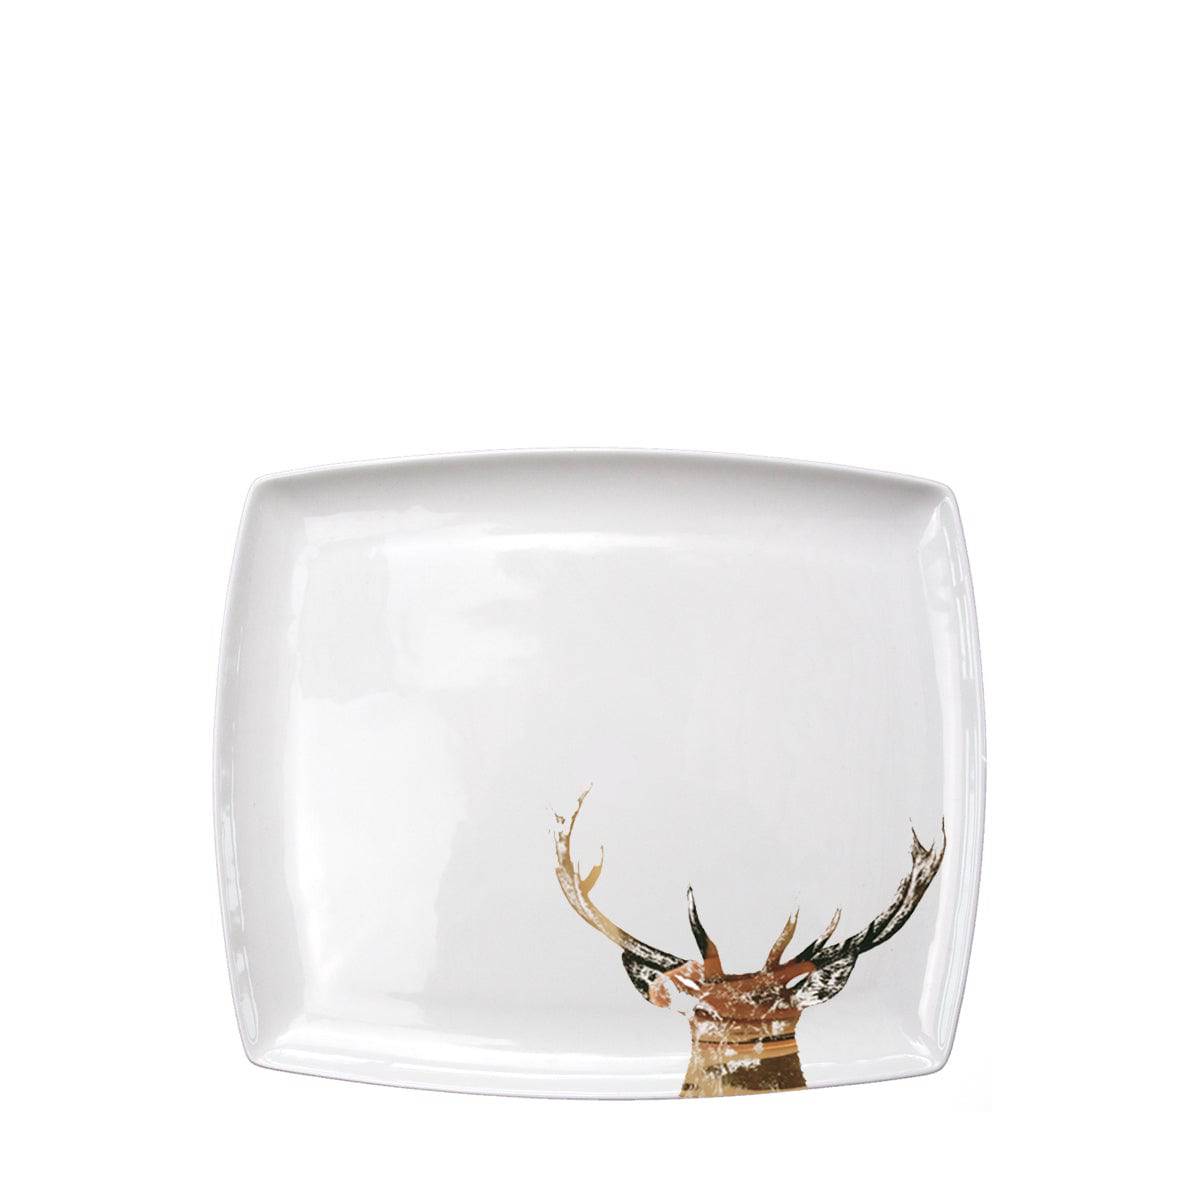 Gold Majestic Stag Platter - Small for sale - Woodcock and Cavendish